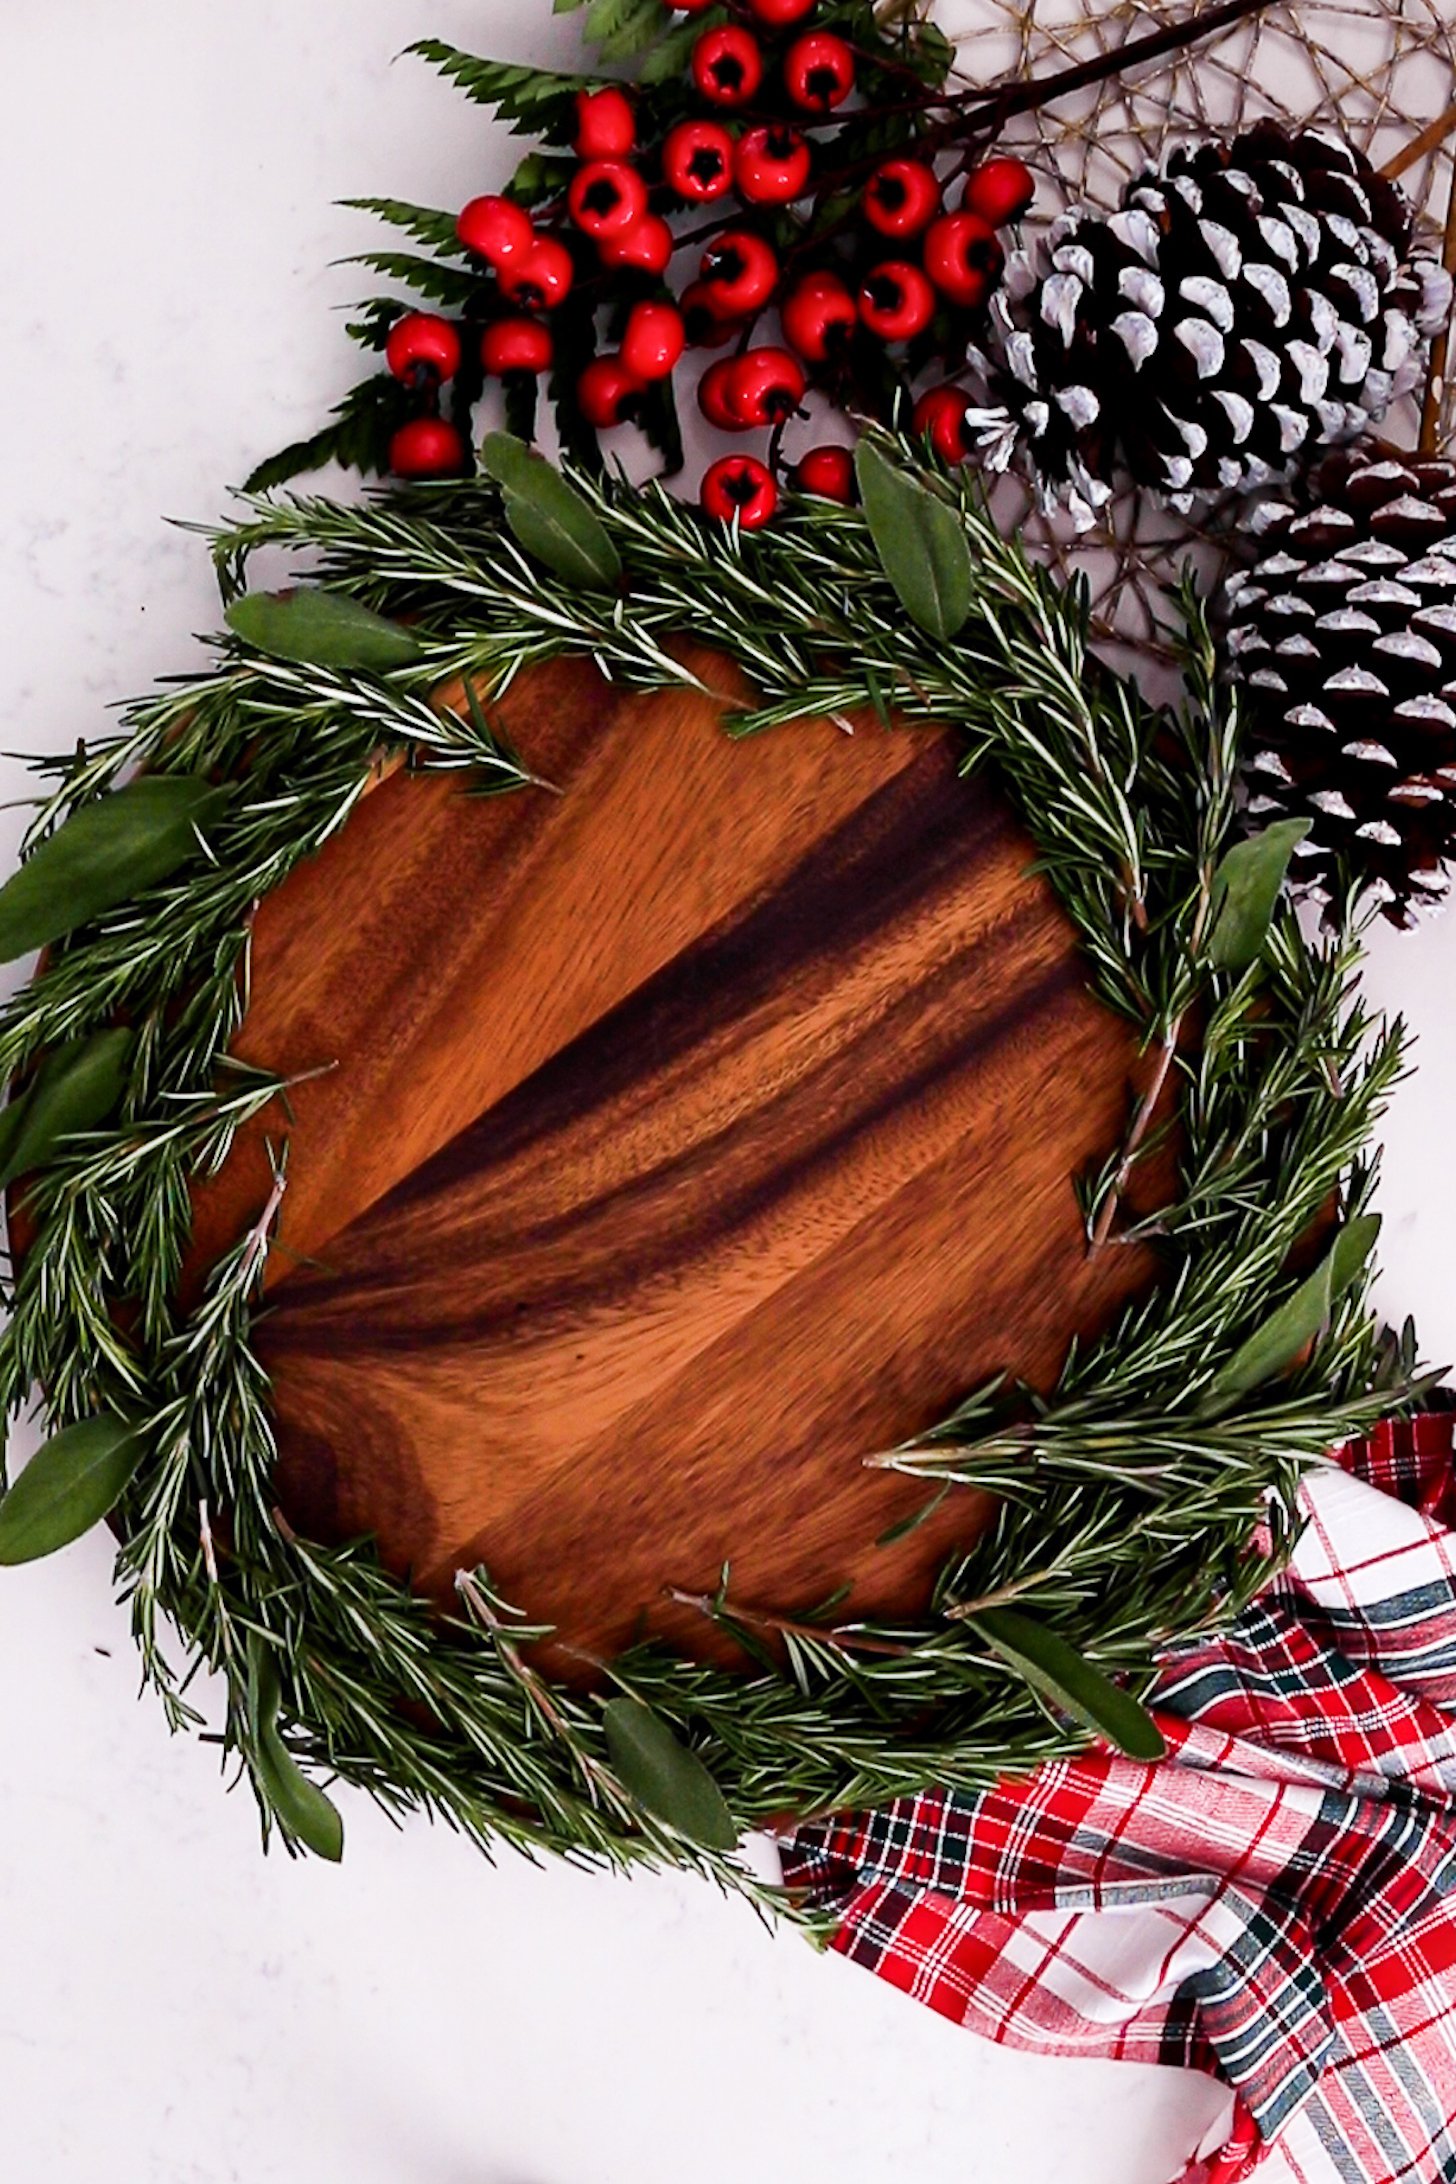 On a lazy Susan, a thick layer of fresh rosemary and few sage leaves line the edge, surrounded by festive decorations